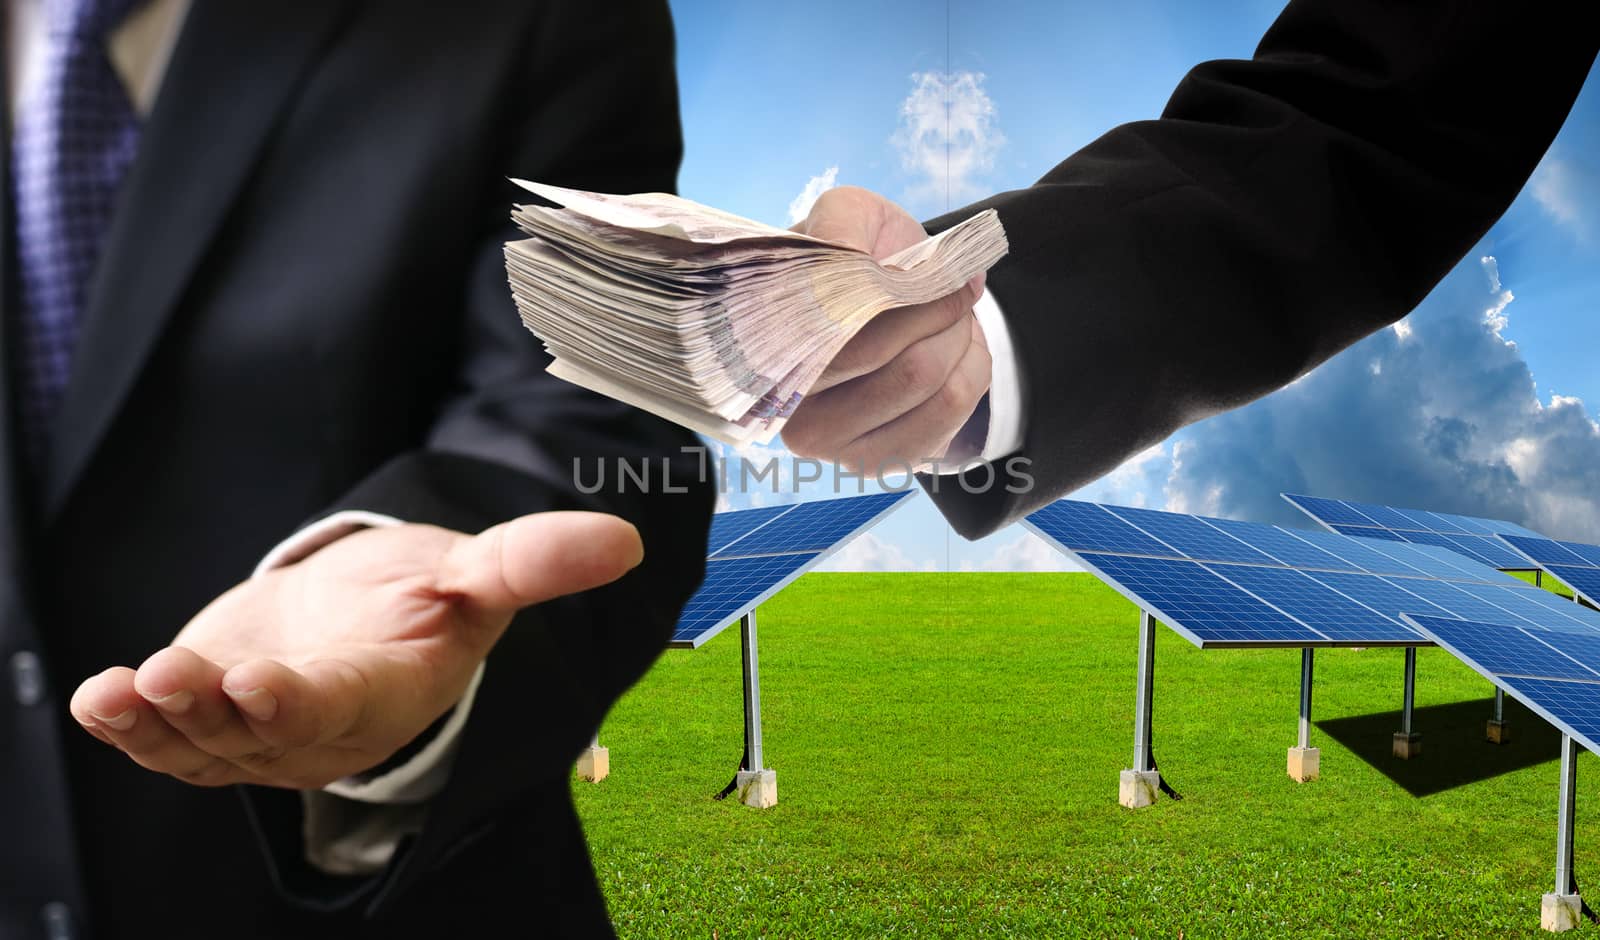 Investor pay for build solar farm to contractor concept by pixbox77